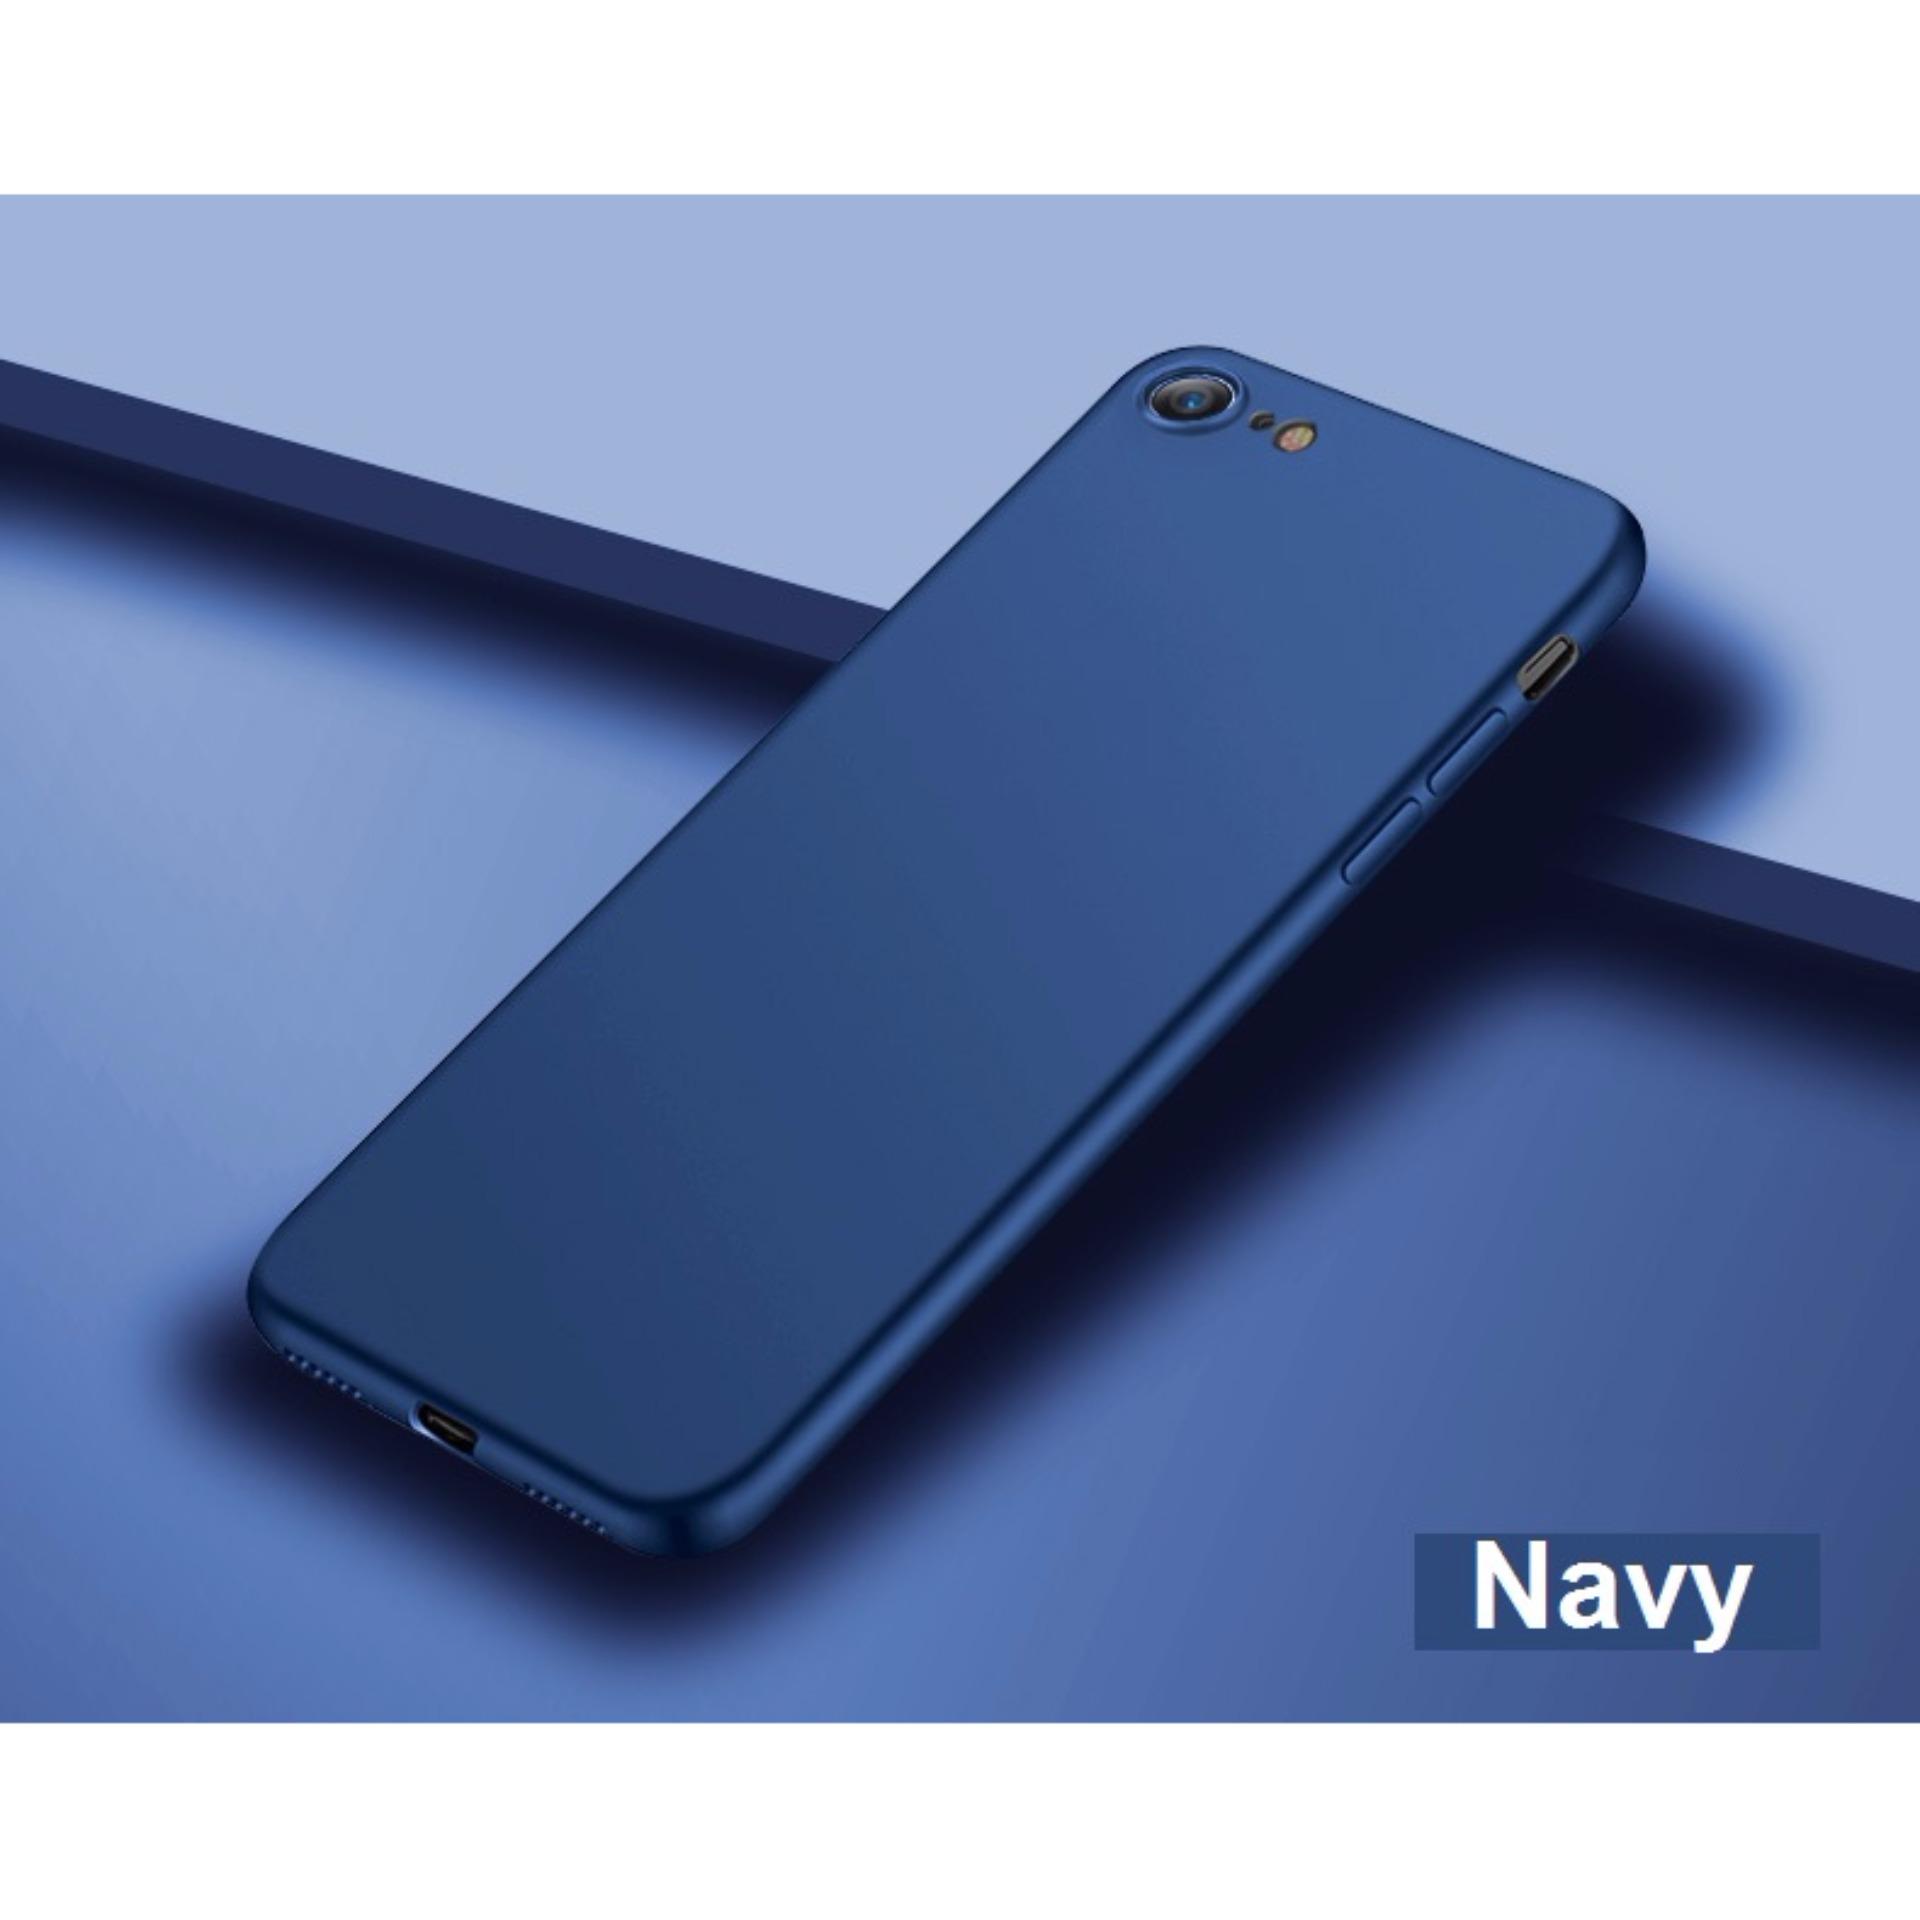 (Navy) Ultra Slim Matte Precise Fit Matte Case Casing Cover for iPhone 8 / iPhone 7